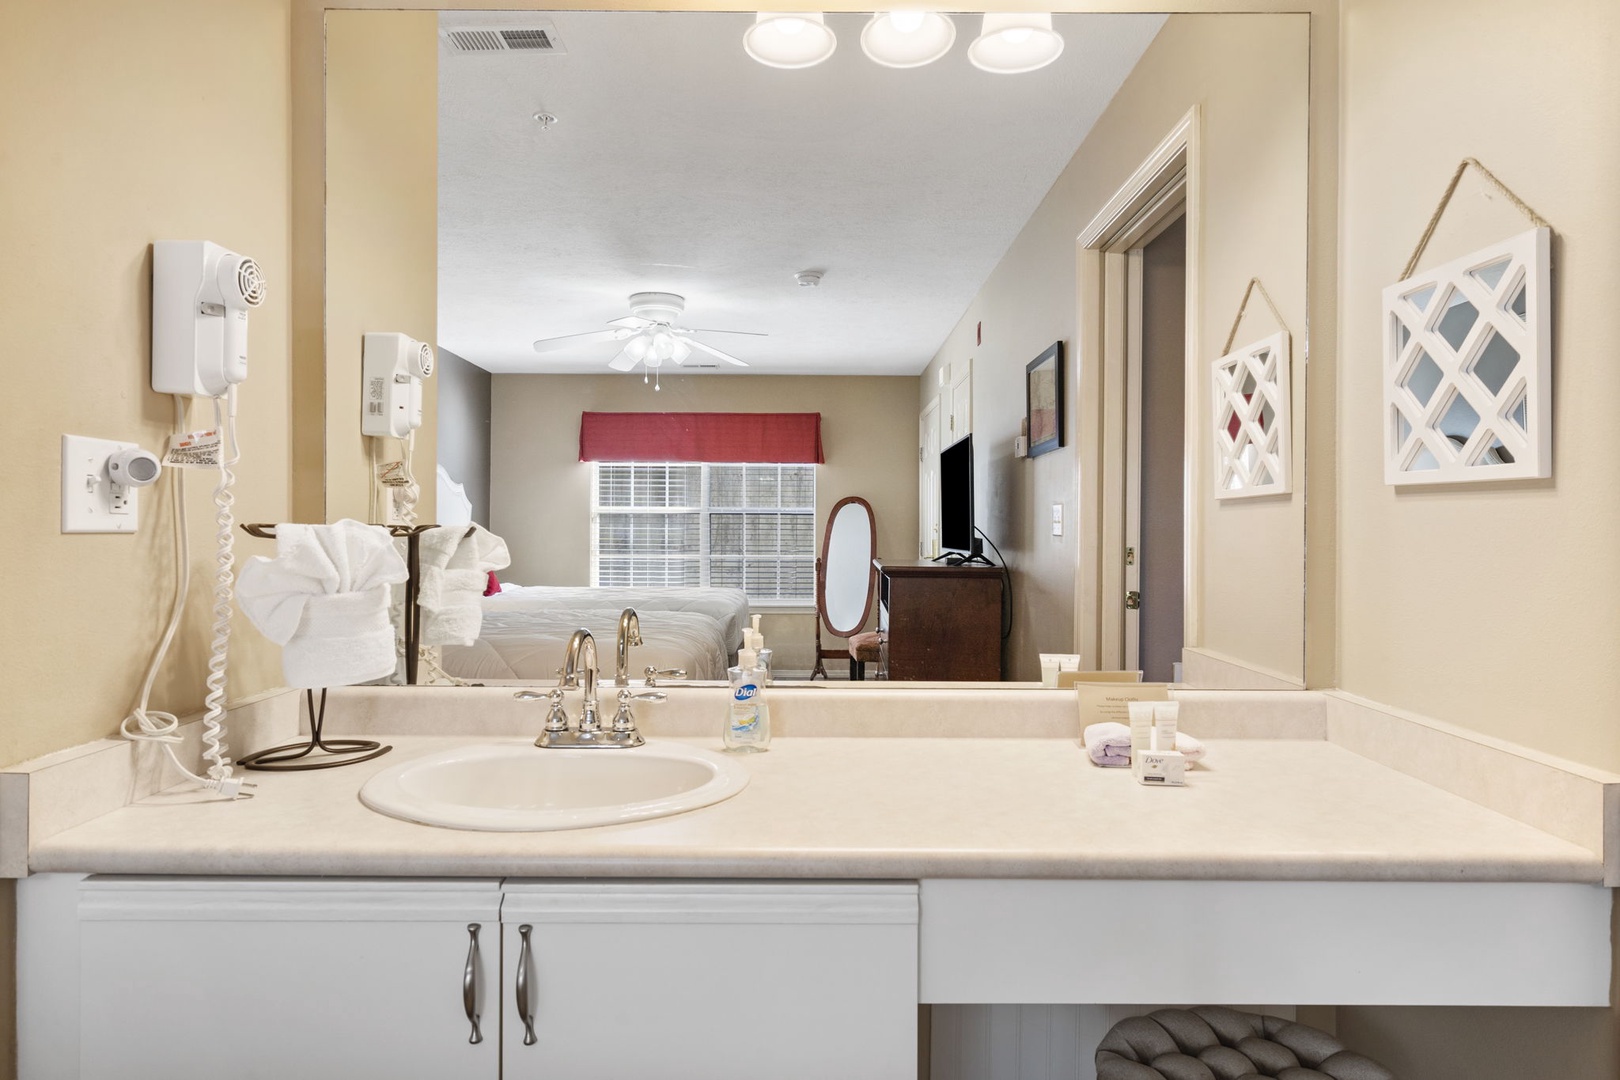 A convenient Vanity Counter is available off the Double-Queen Bedroom